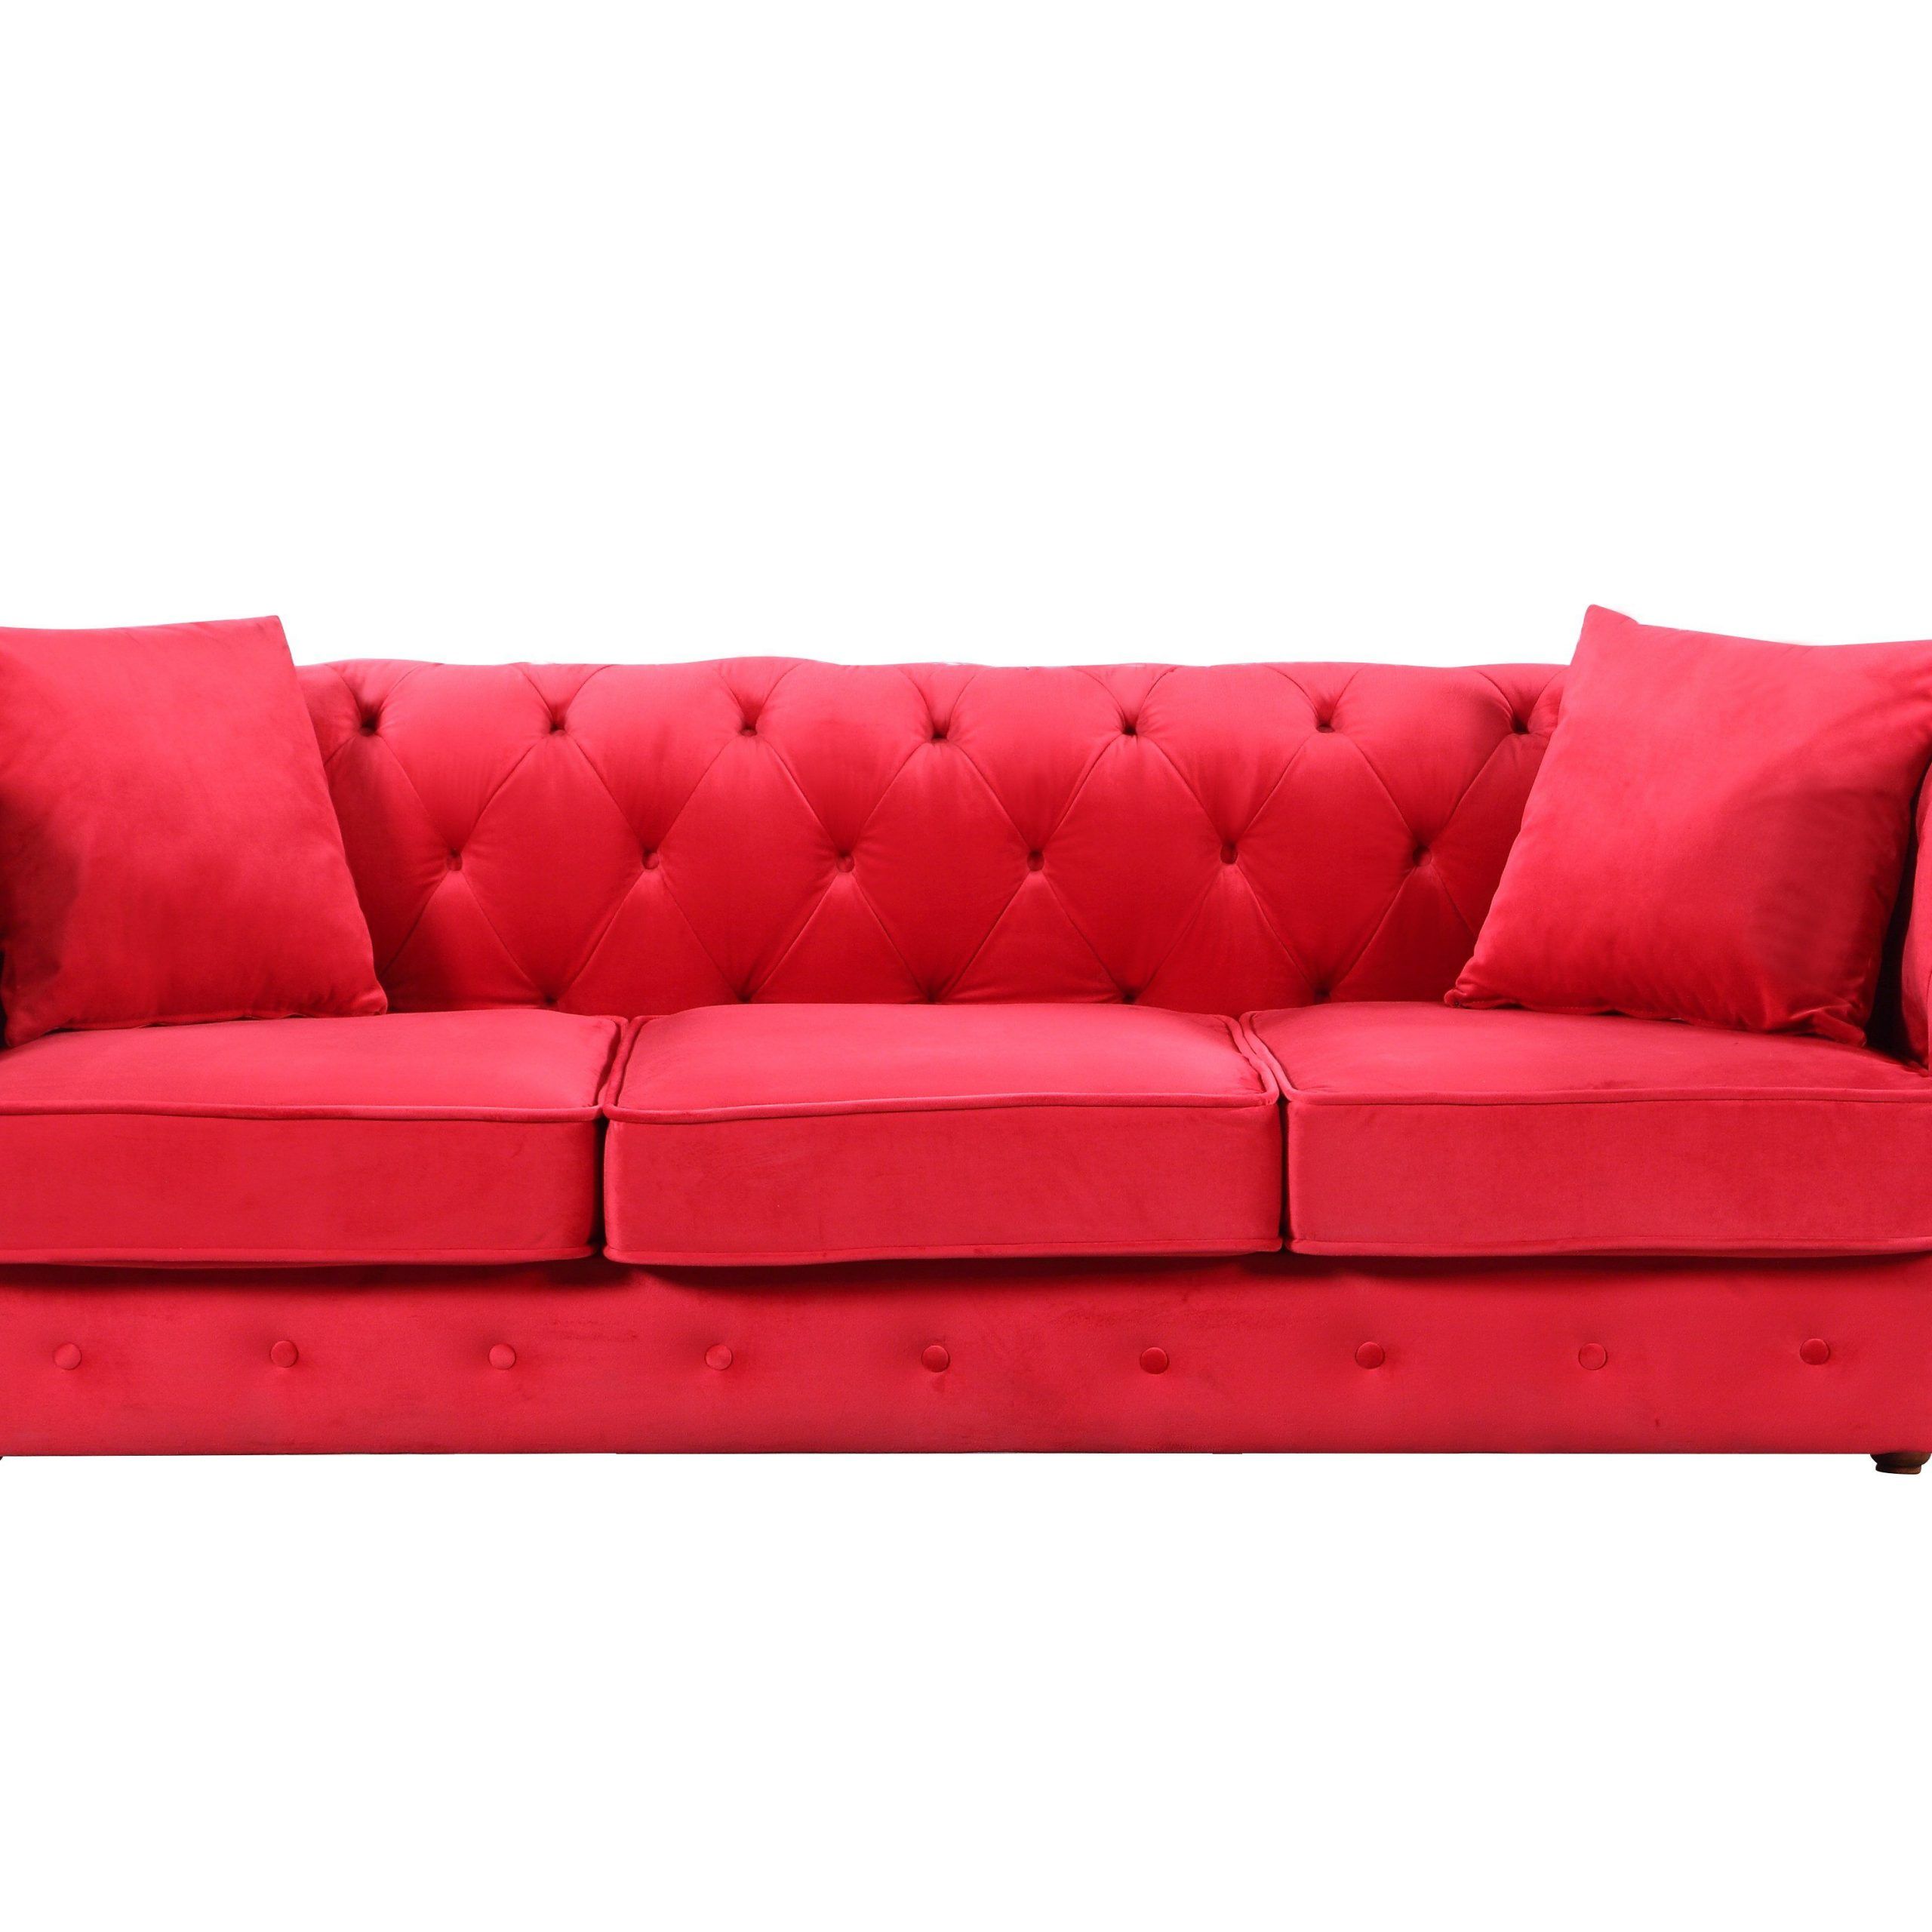 Stratford Classic Velvet Fabric Chesterfield Sofa | Fabric With Stratford Sofas (View 9 of 15)